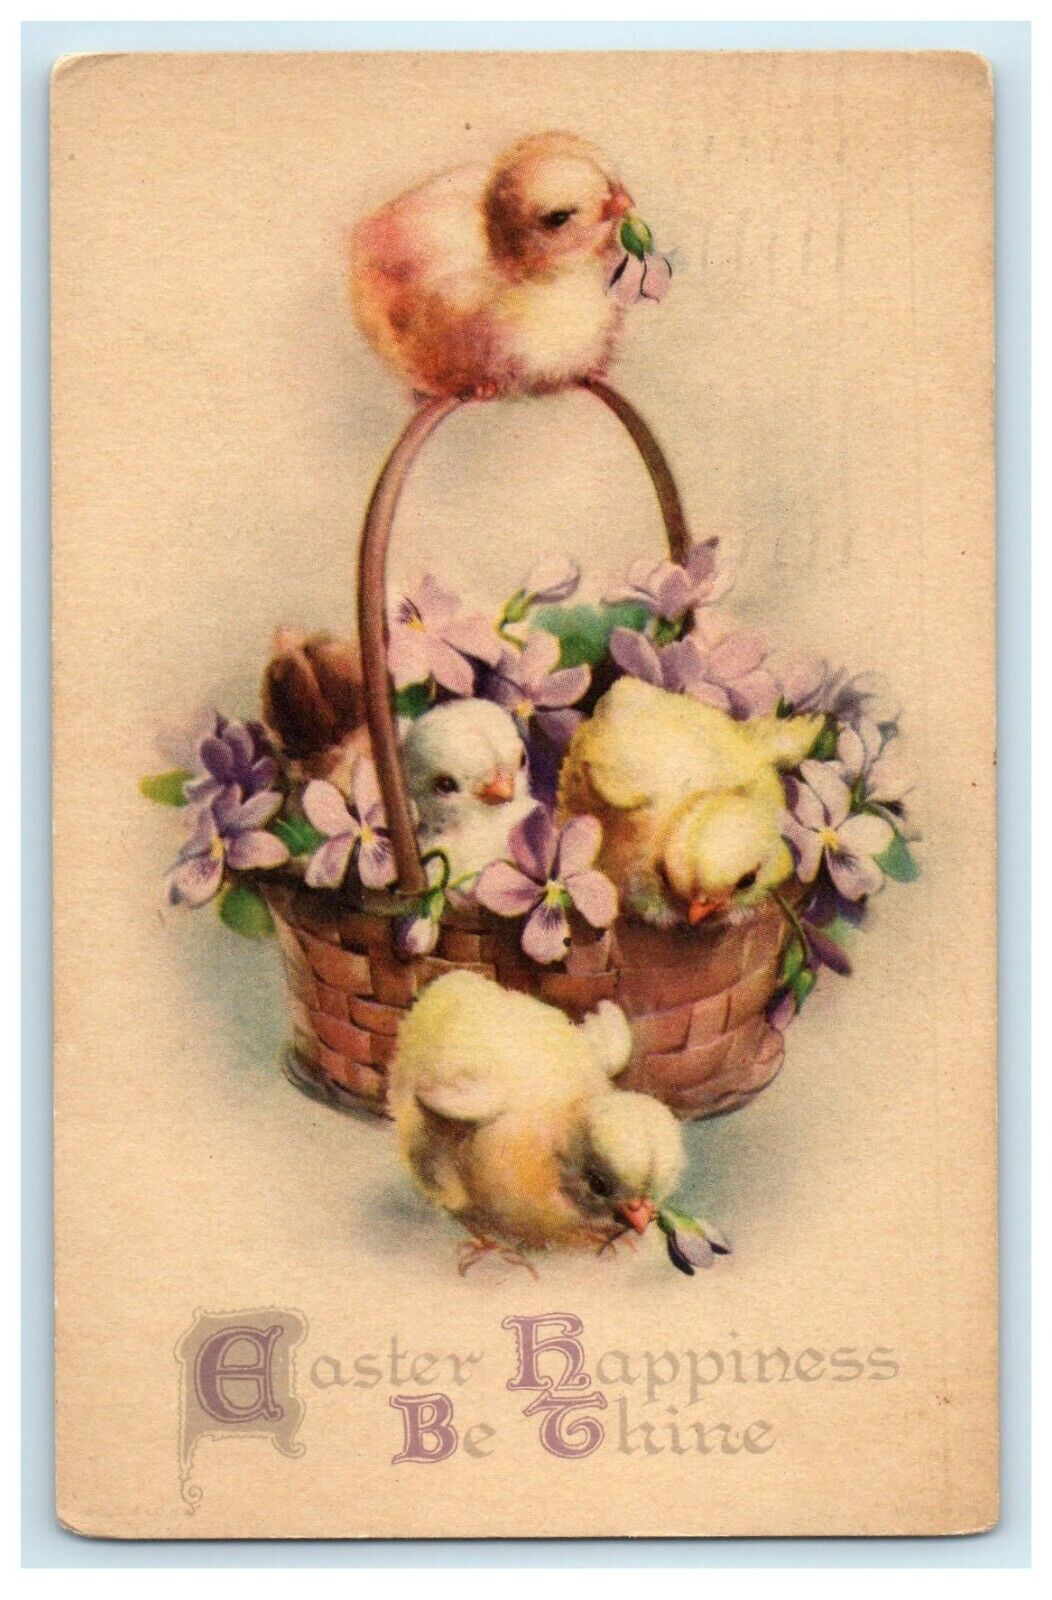 1929 Greetings Easter Happiness Chicks And Flowers In Basket Antique Postcard